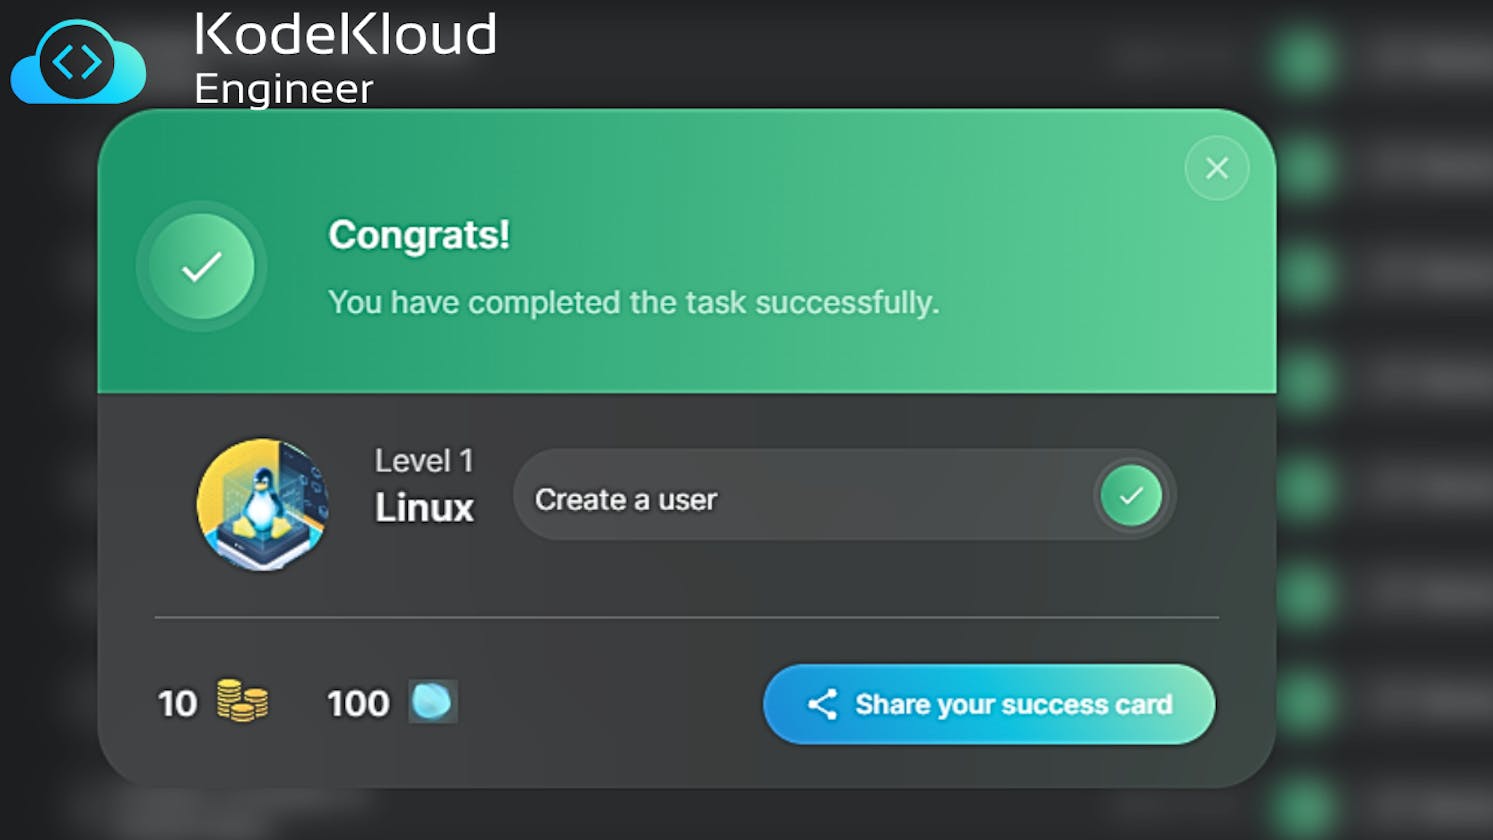 Step by step approach of Linux task on creating a user by the KodeKloud Engineer Program: